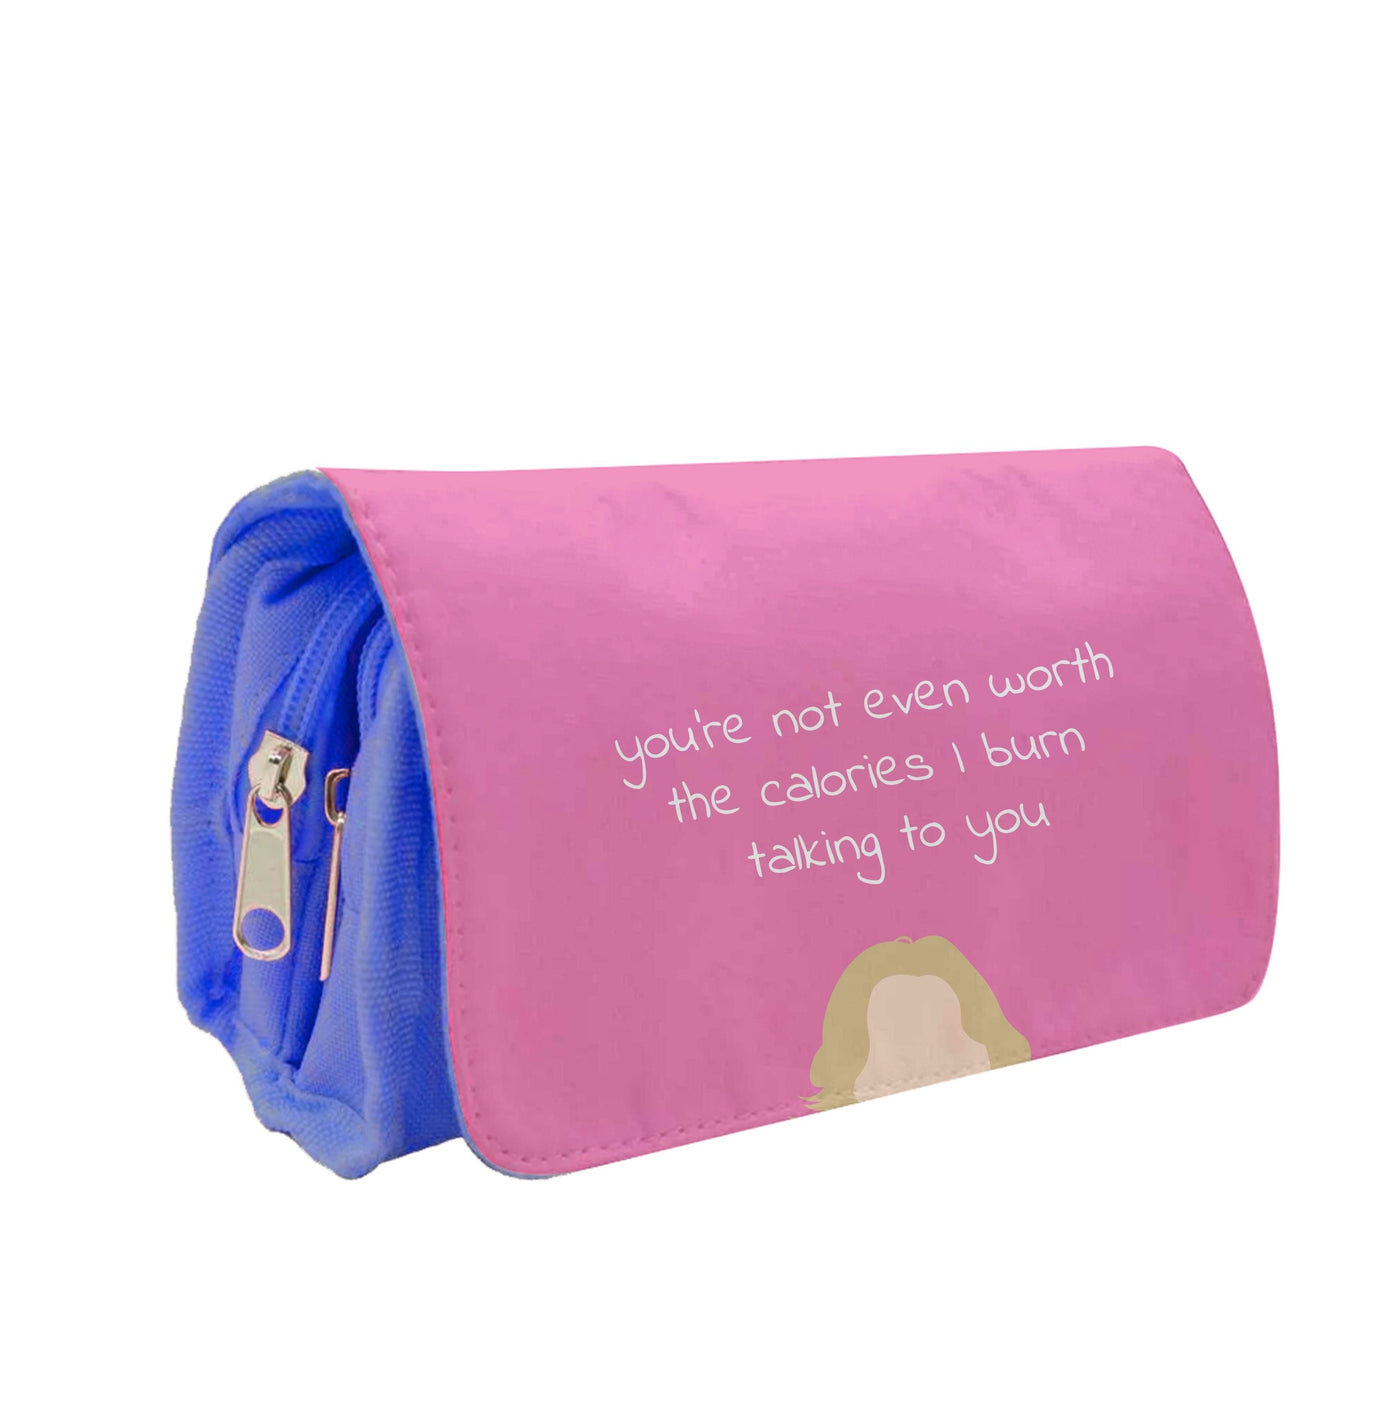 You're Not Even Worth The Calories I Burn Talking To You - Vampire Diaries Pencil Case